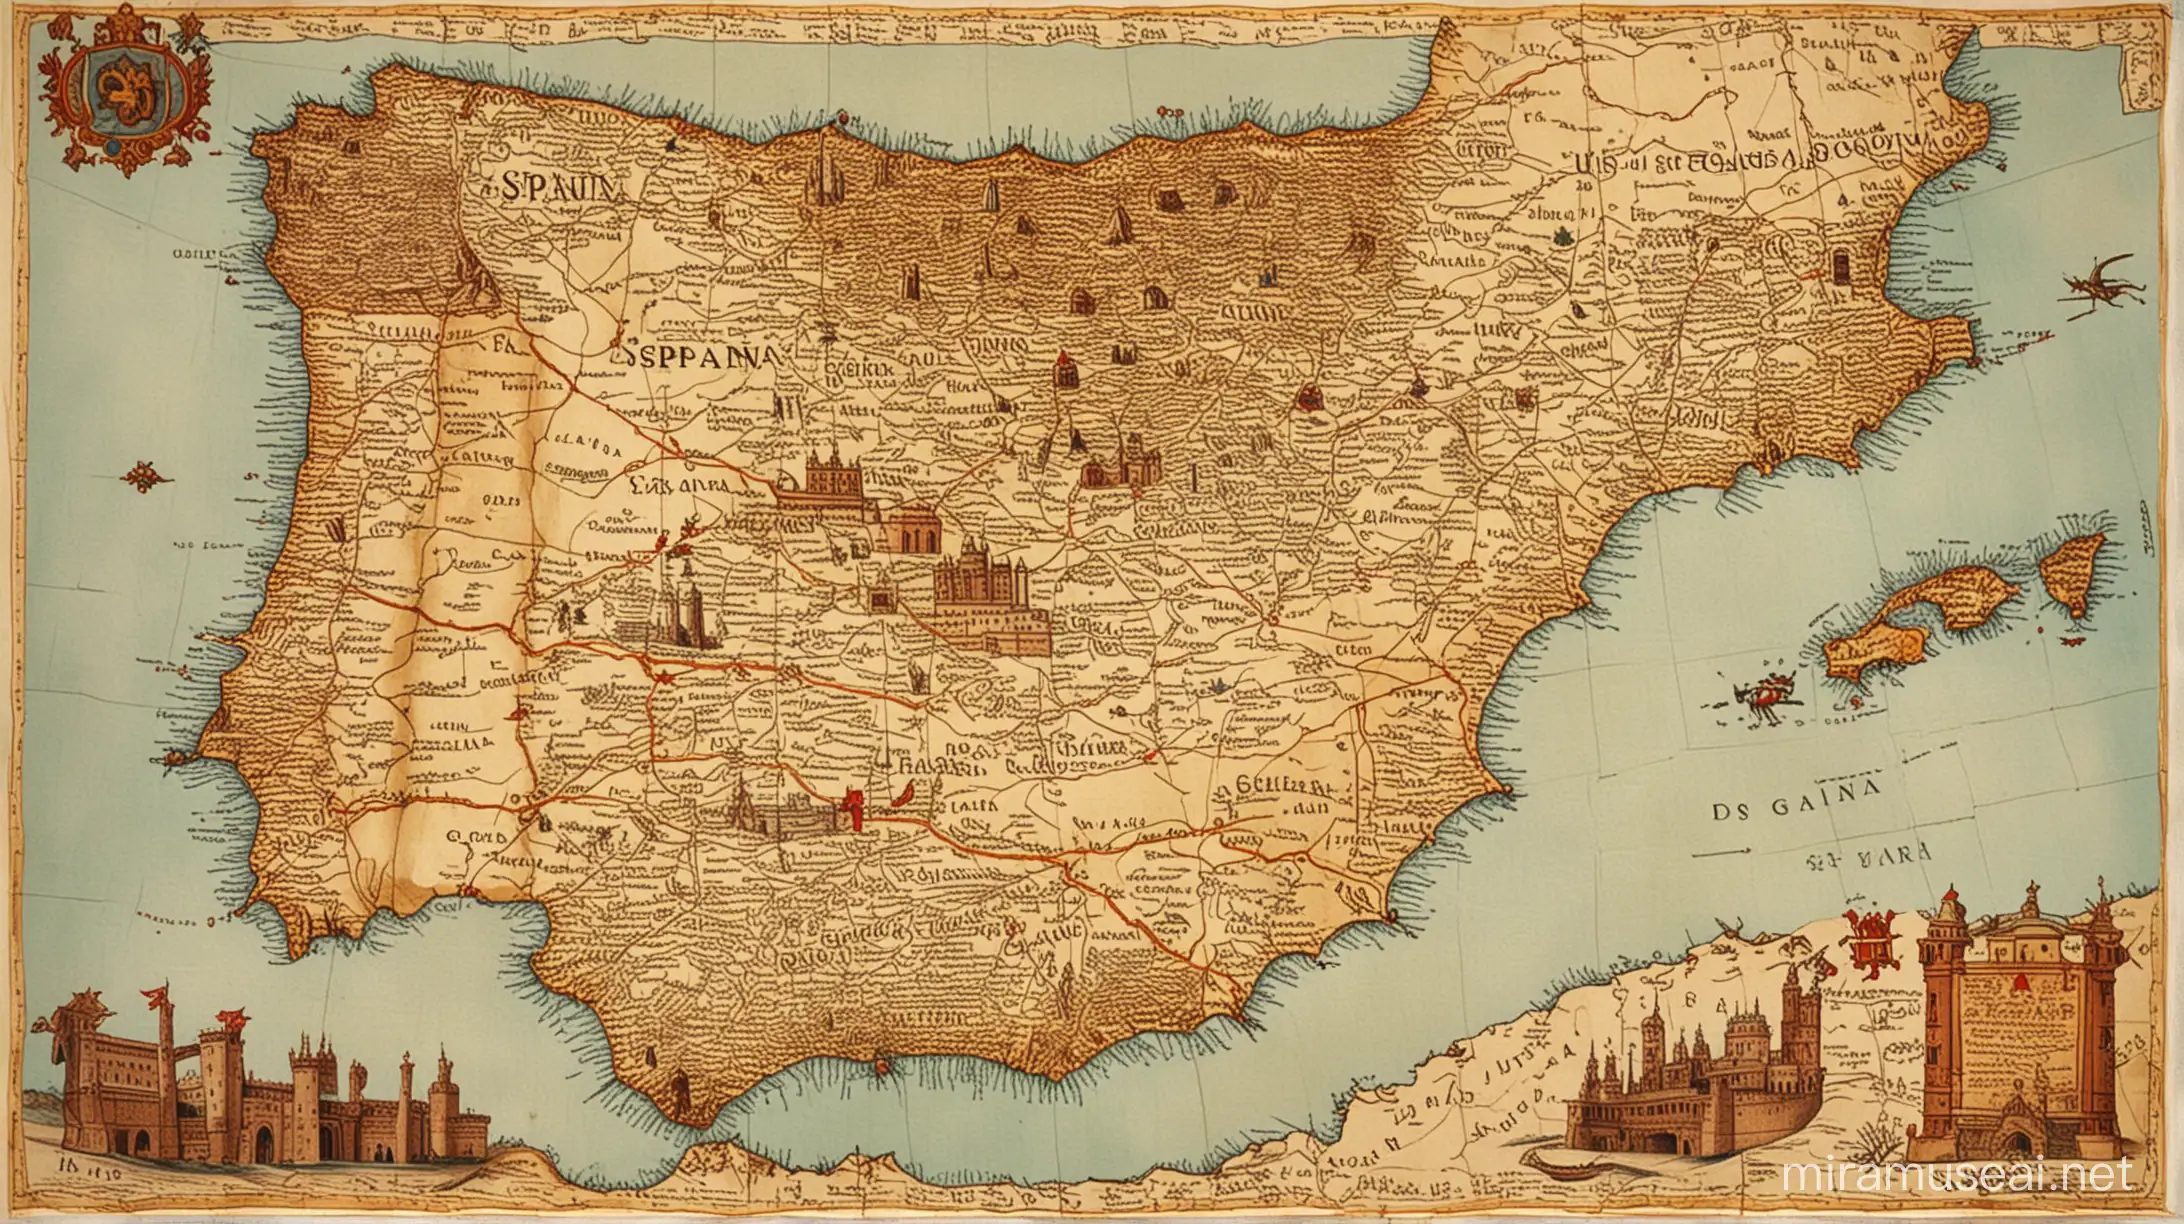 Historical Paper Map of Spain from the 1300s